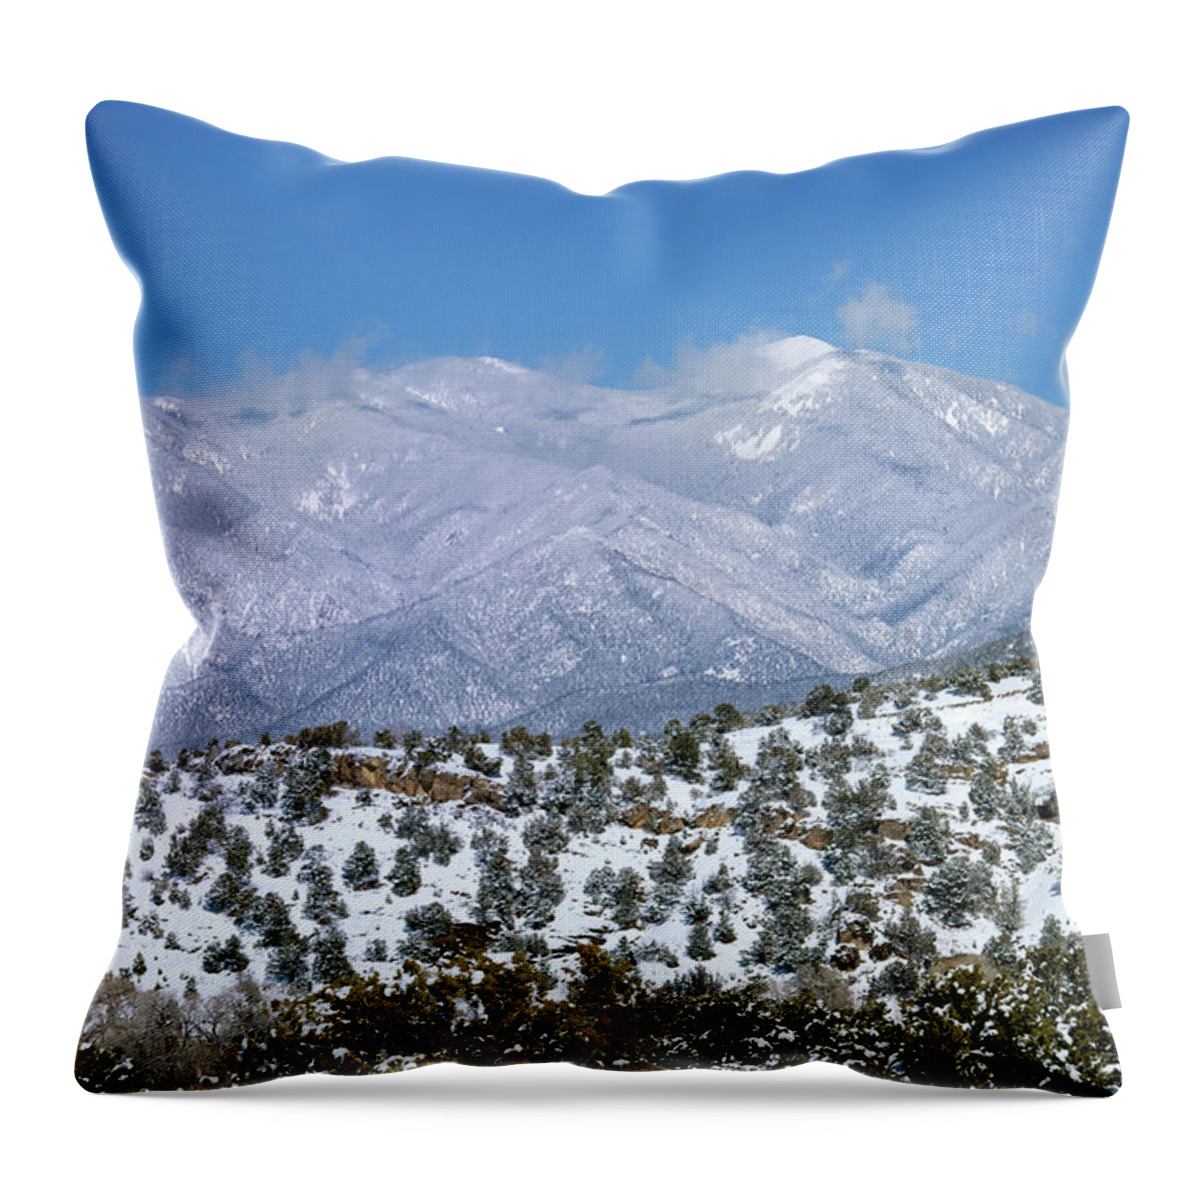 Landscape Throw Pillow featuring the photograph After The Blizzard by Ron Cline